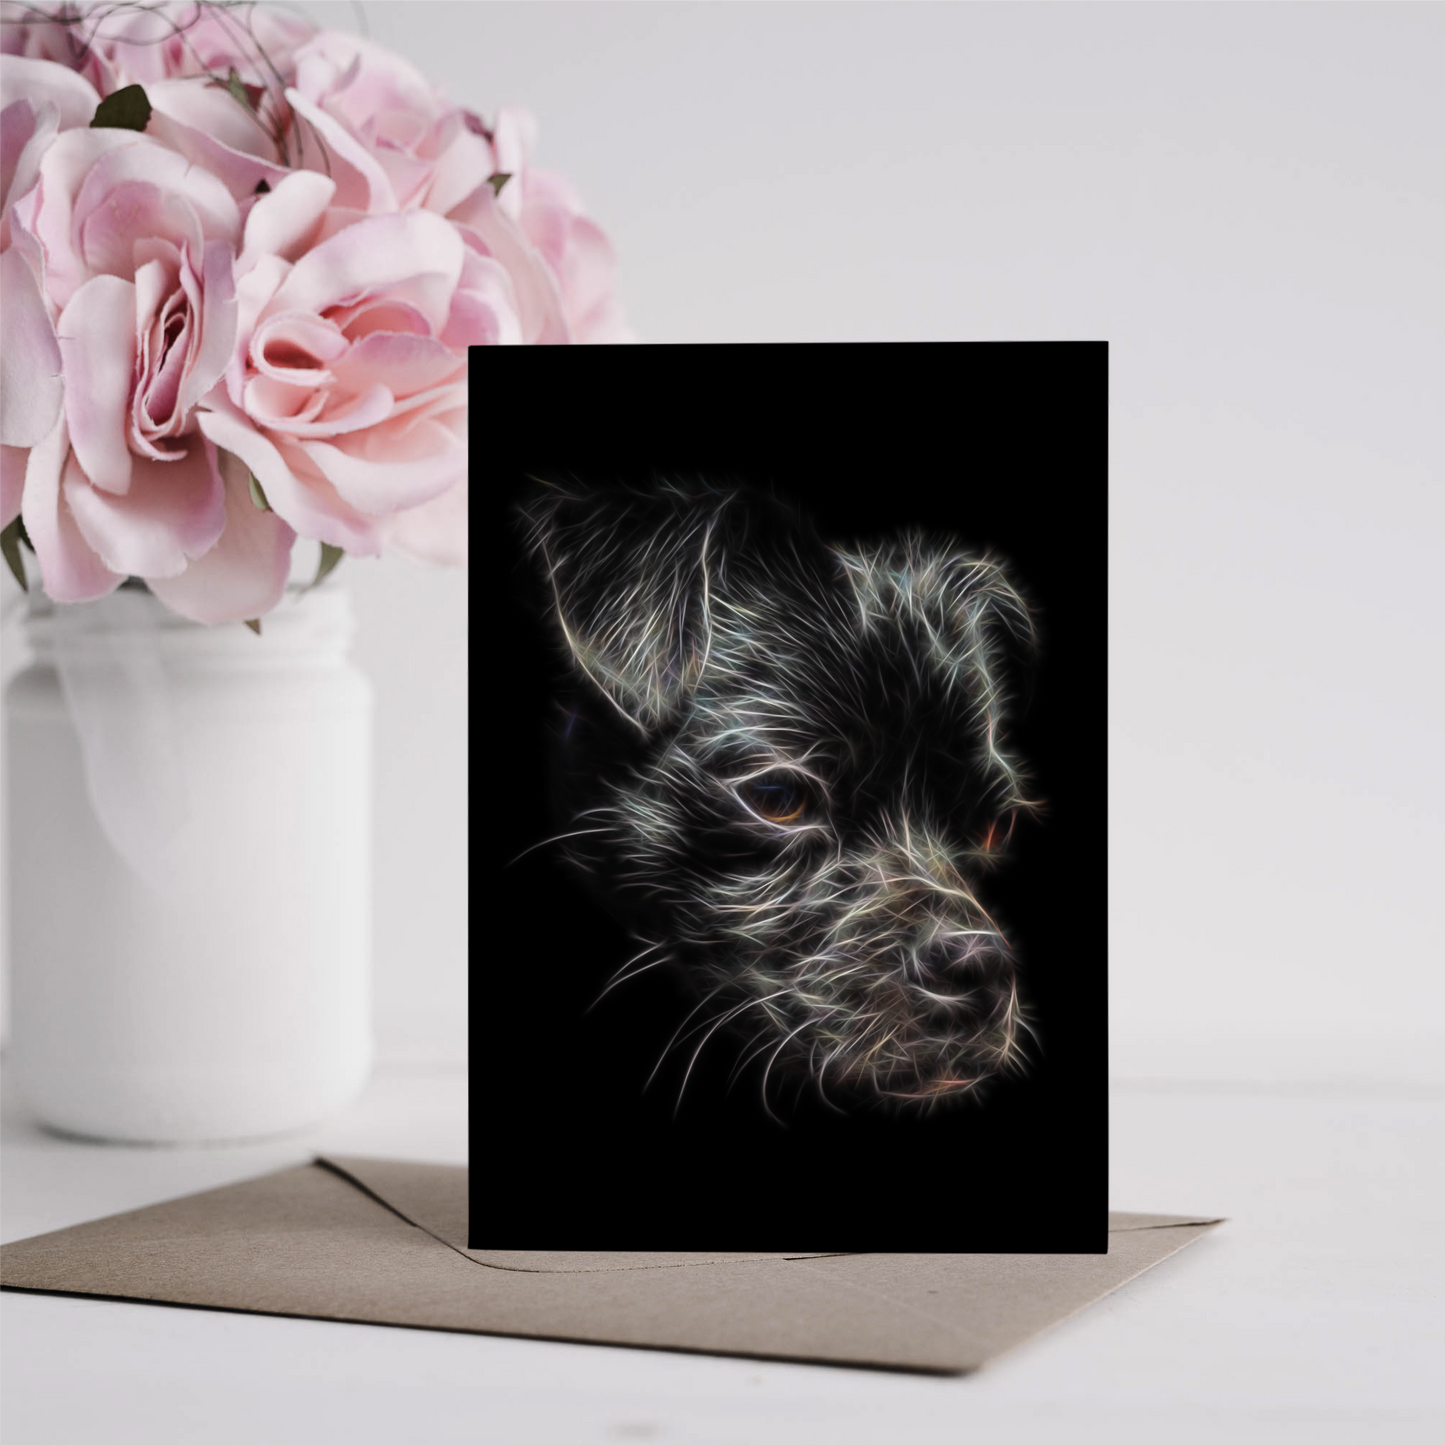 Black Chug Greeting Card Blank Inside for Birthdays or any other Occasion